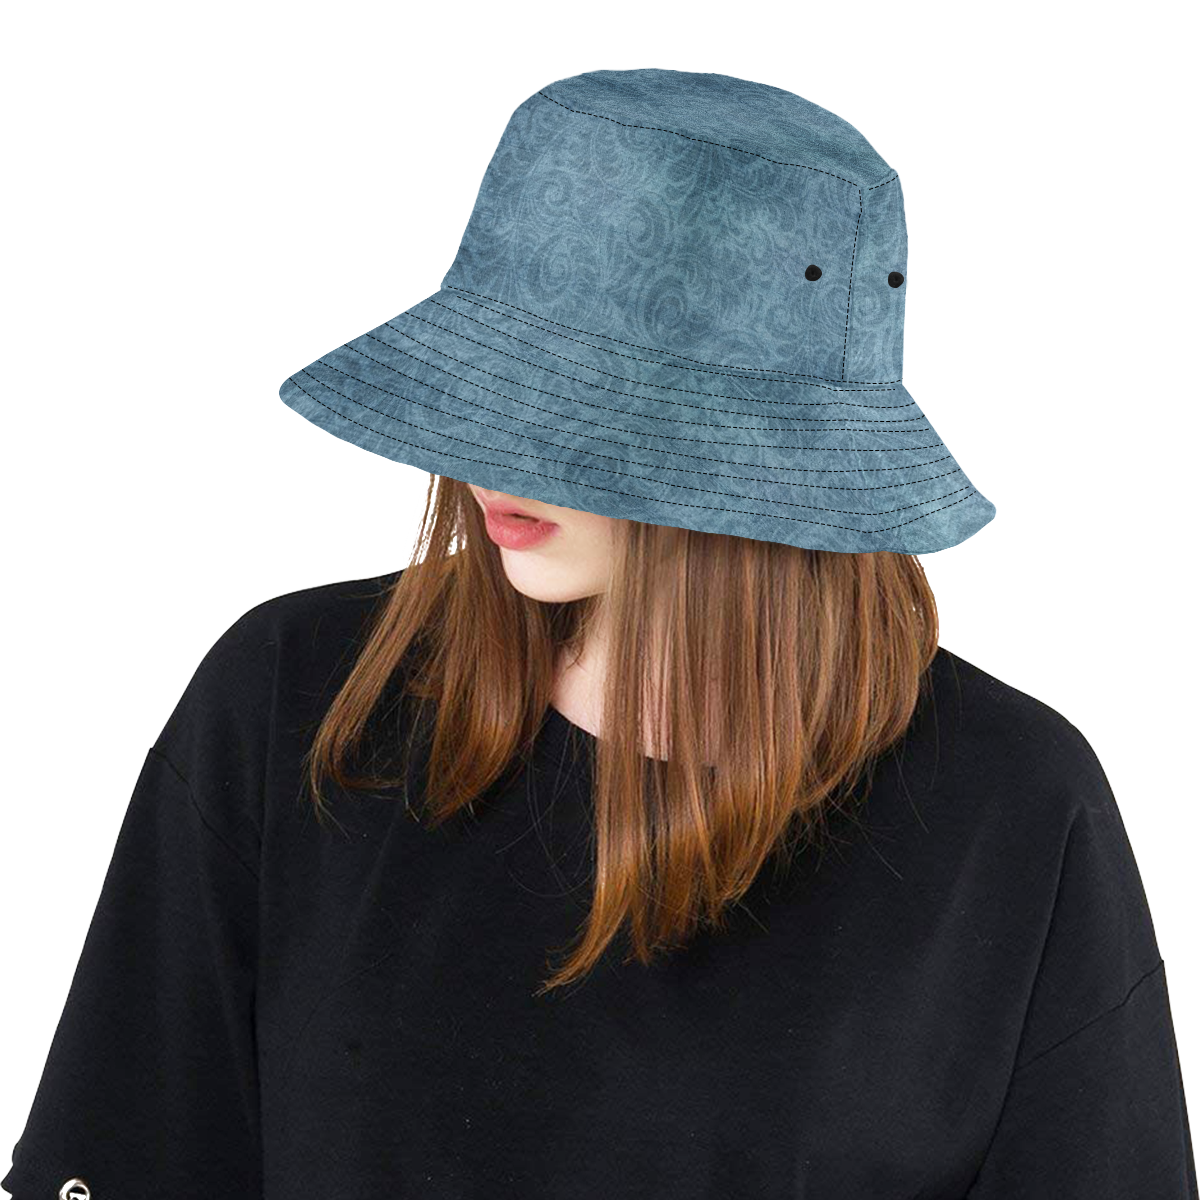 Denim with vintage floral pattern, turquoise blue All Over Print Bucket Hat